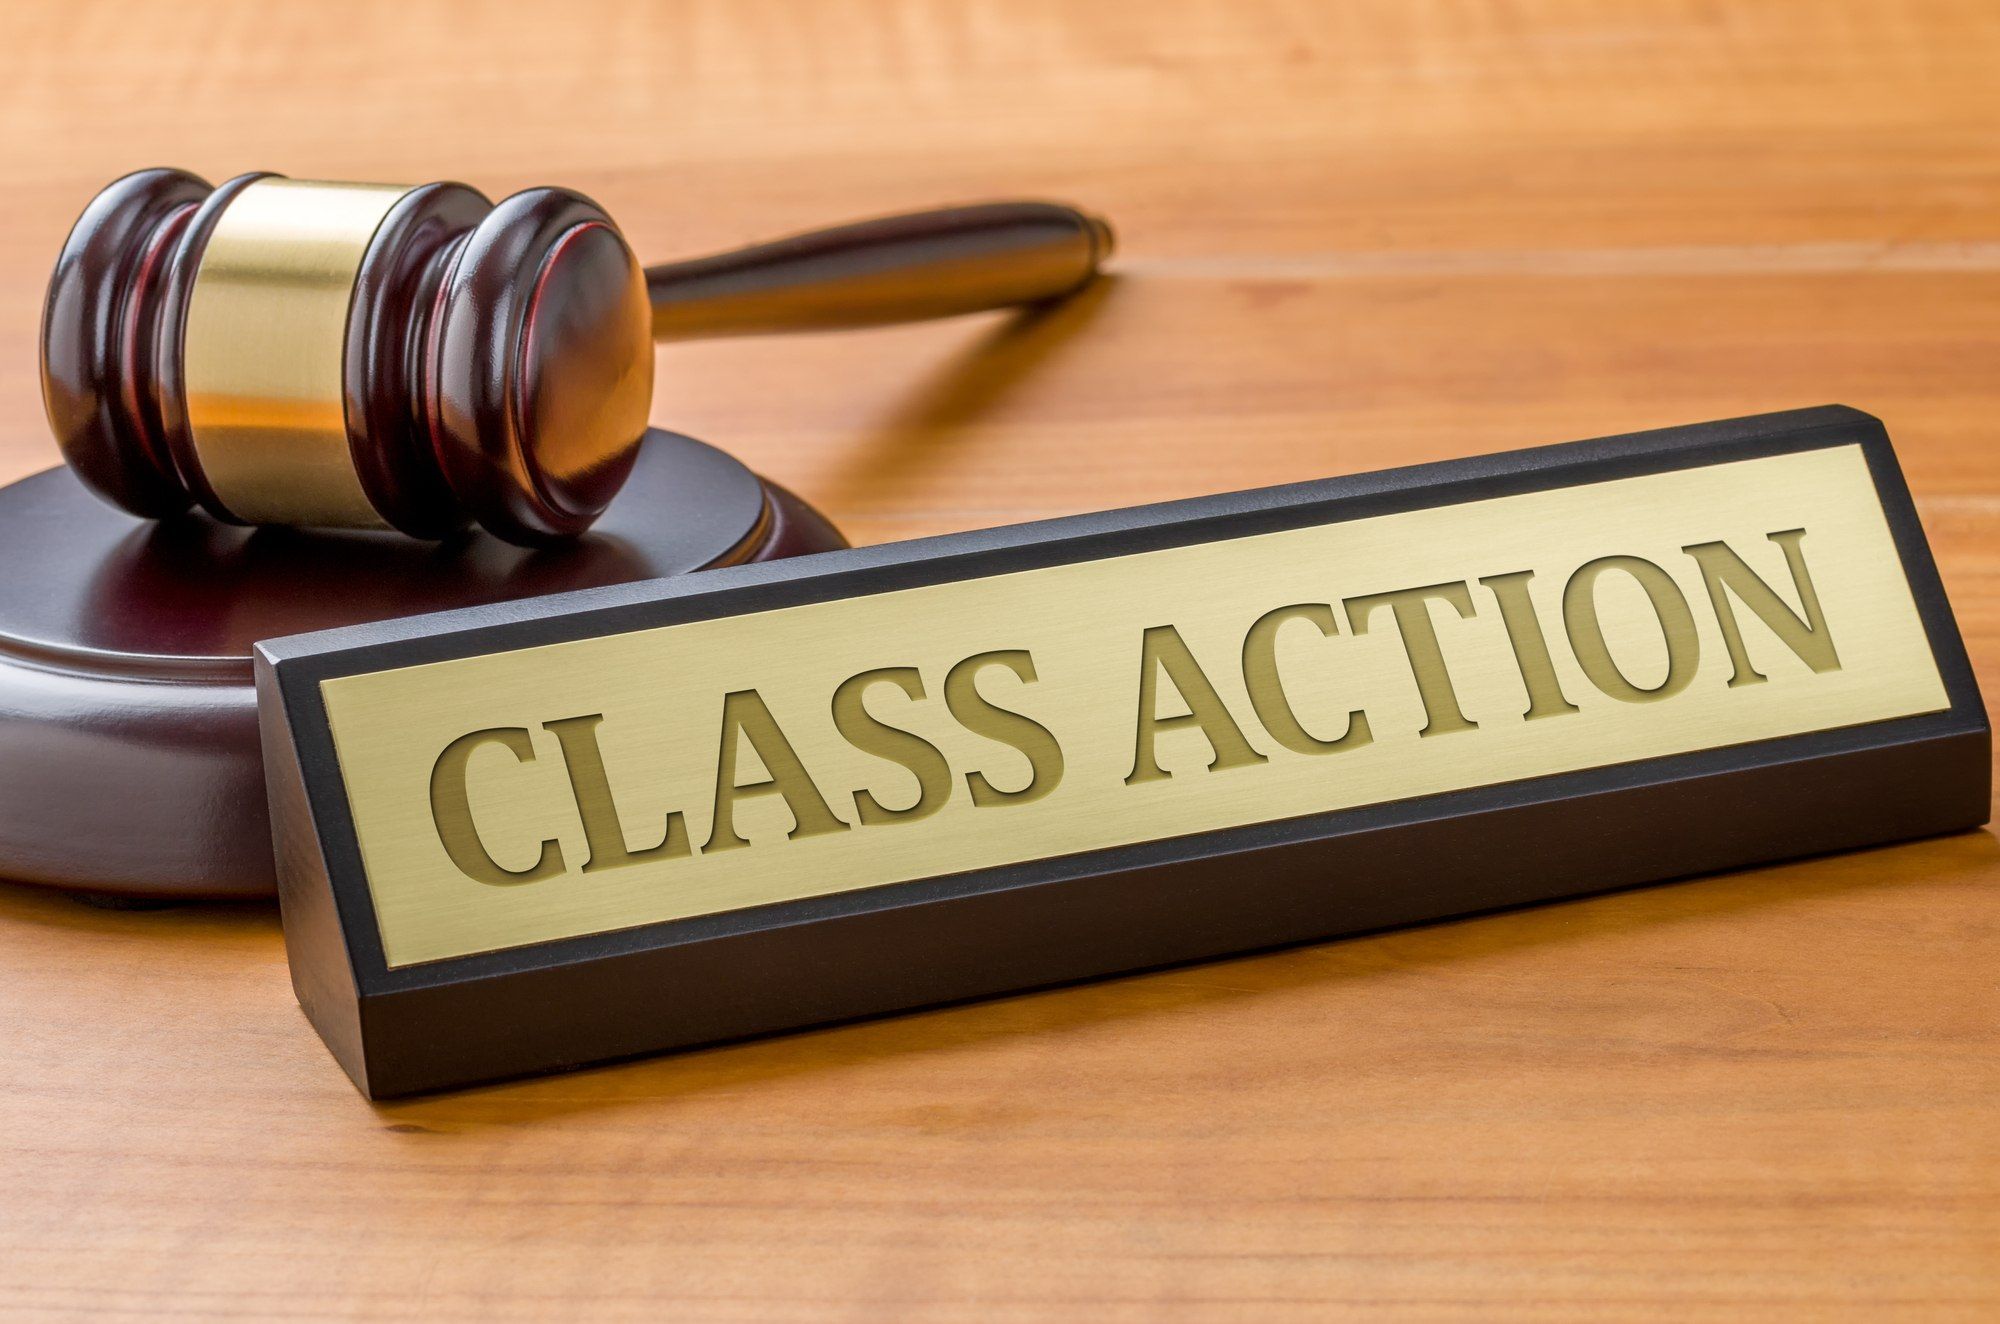 Class action label and gavel regarding information on how many people it takes to file a class action lawsuit